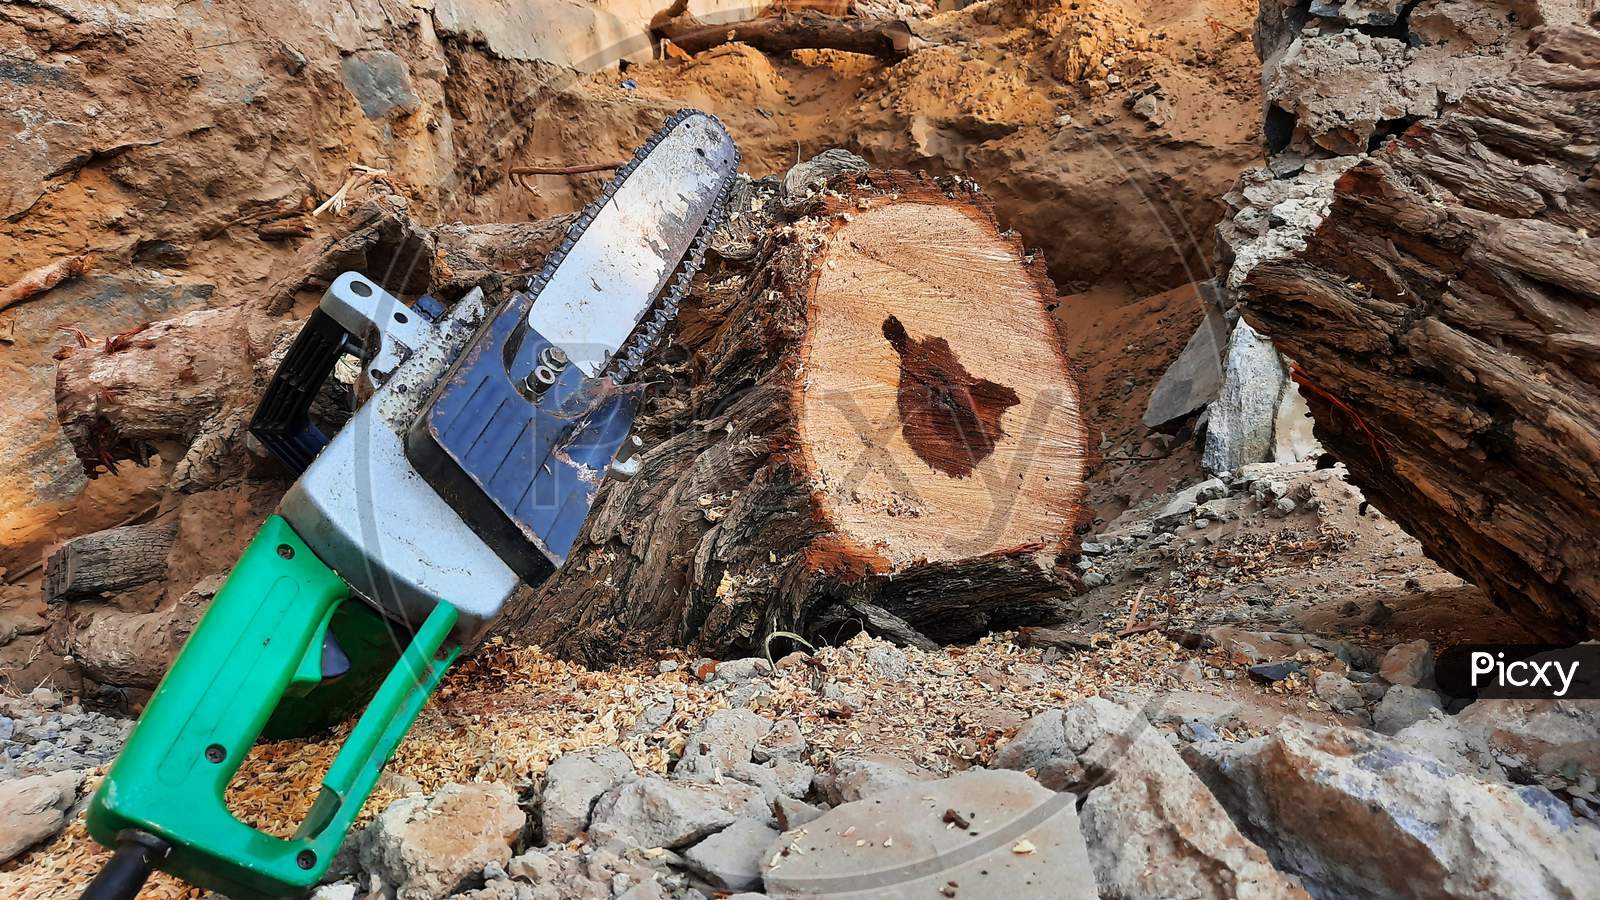 Wood Cutting Electric Chainsaw Machine Near Tree Trunk In Forest